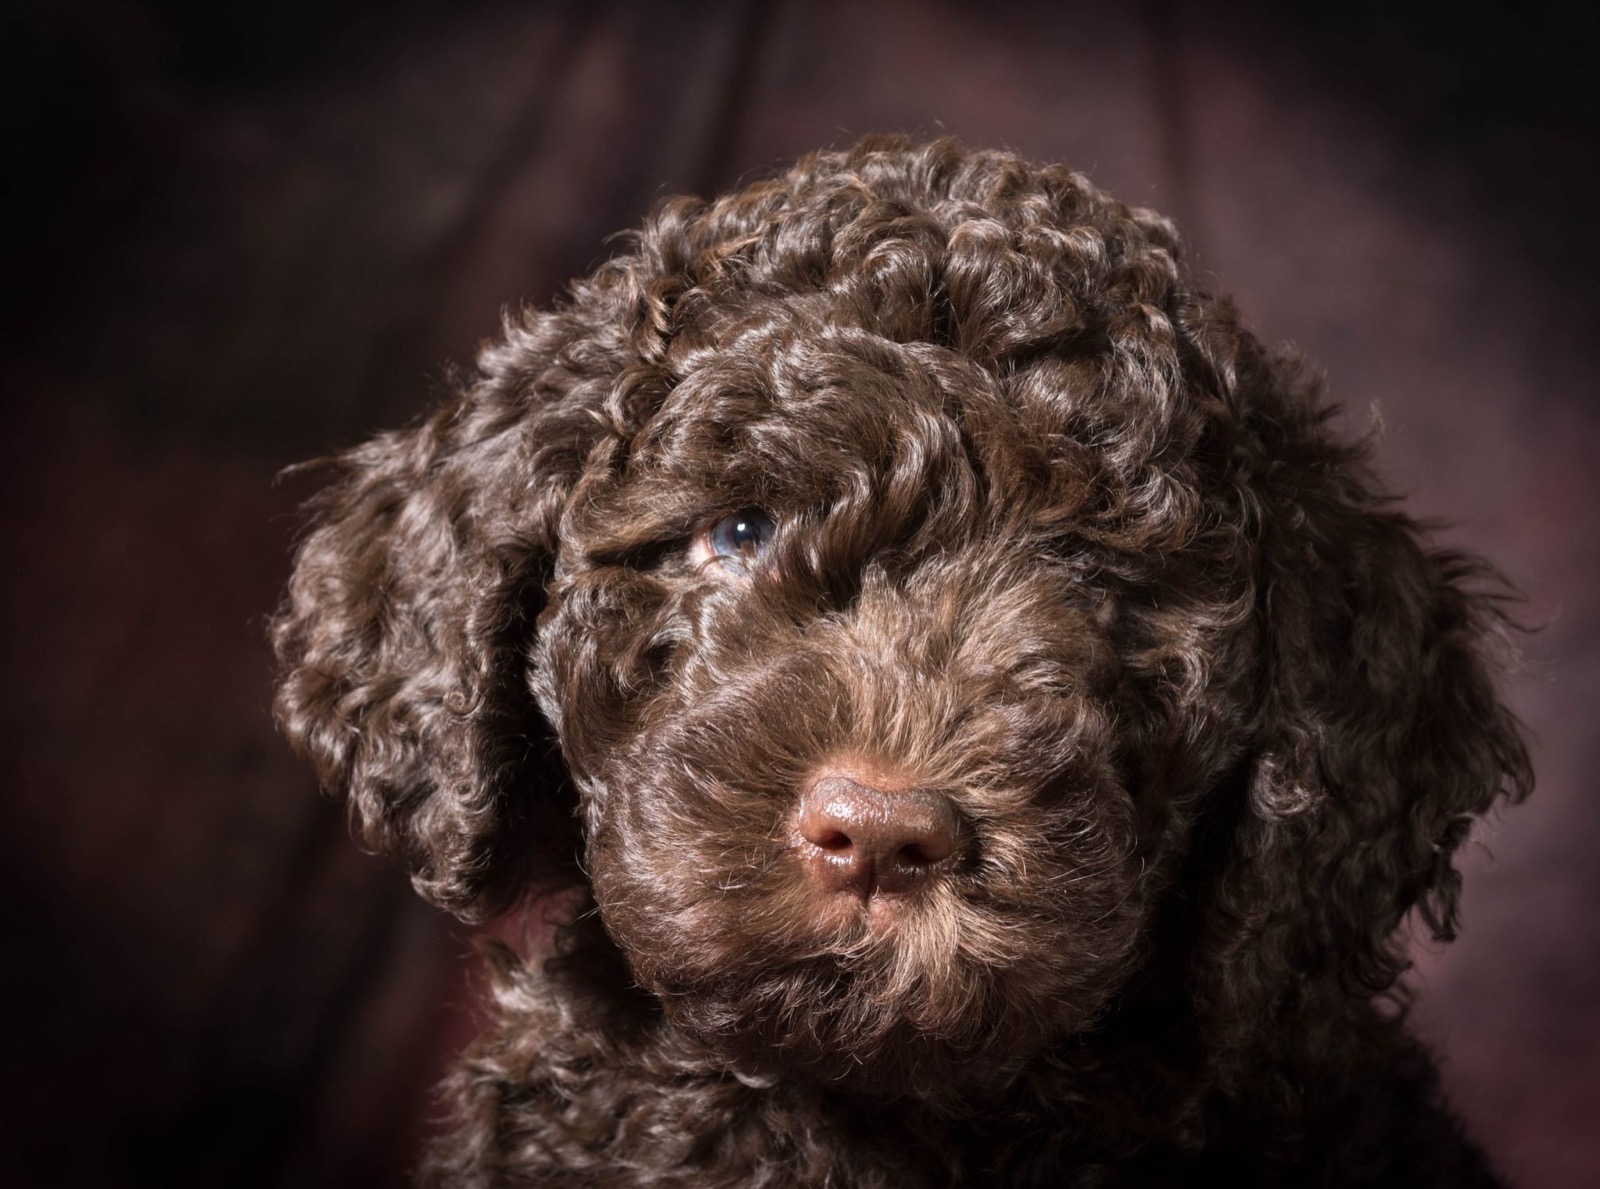 Can You Pass This General Knowledge Quiz While Being Distracted by Cute Puppies? Barbet Puppy